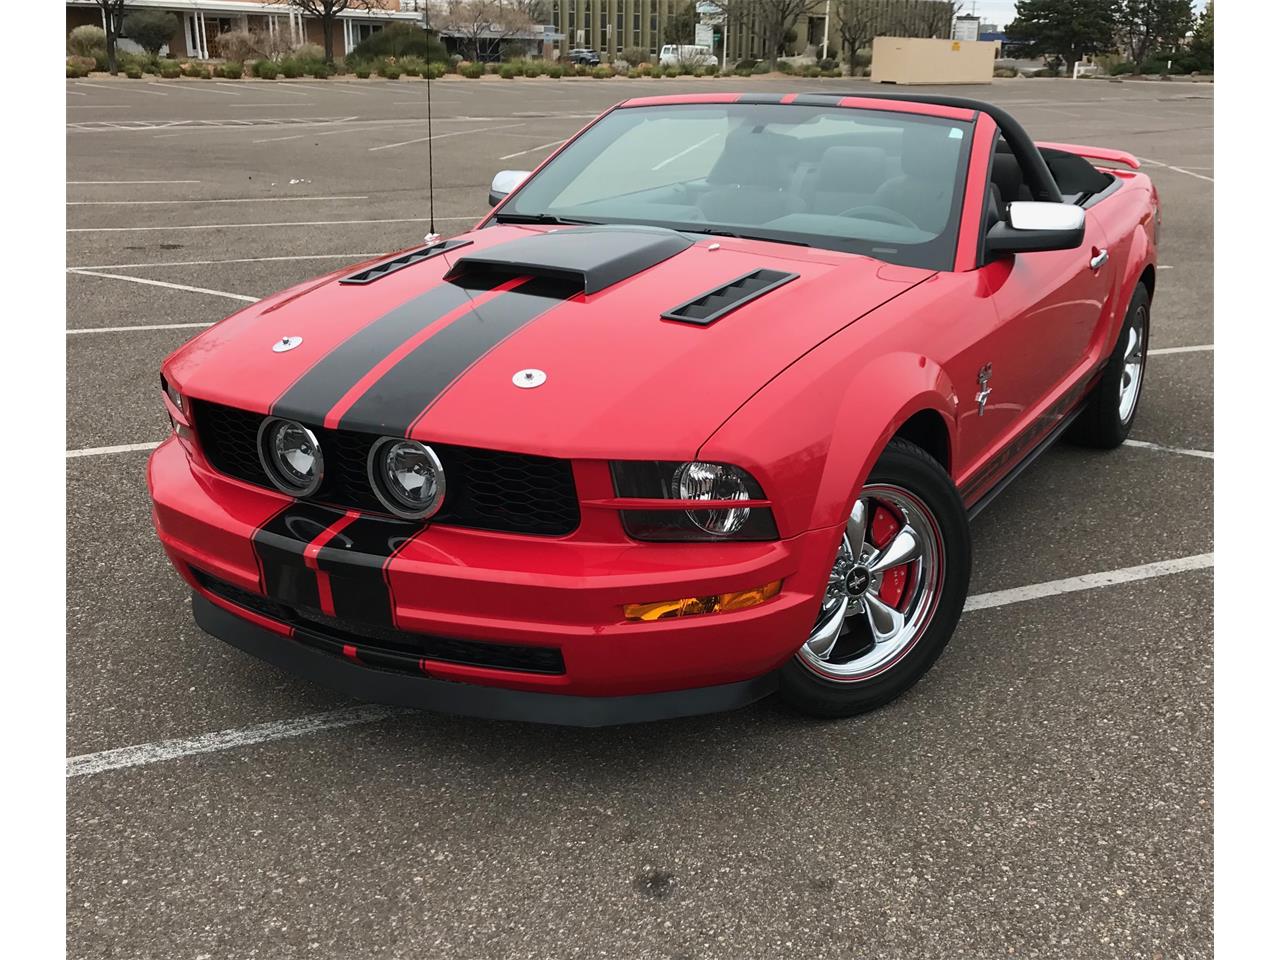 2005 Ford Mustang GT for Sale | ClassicCars.com | CC-1086579